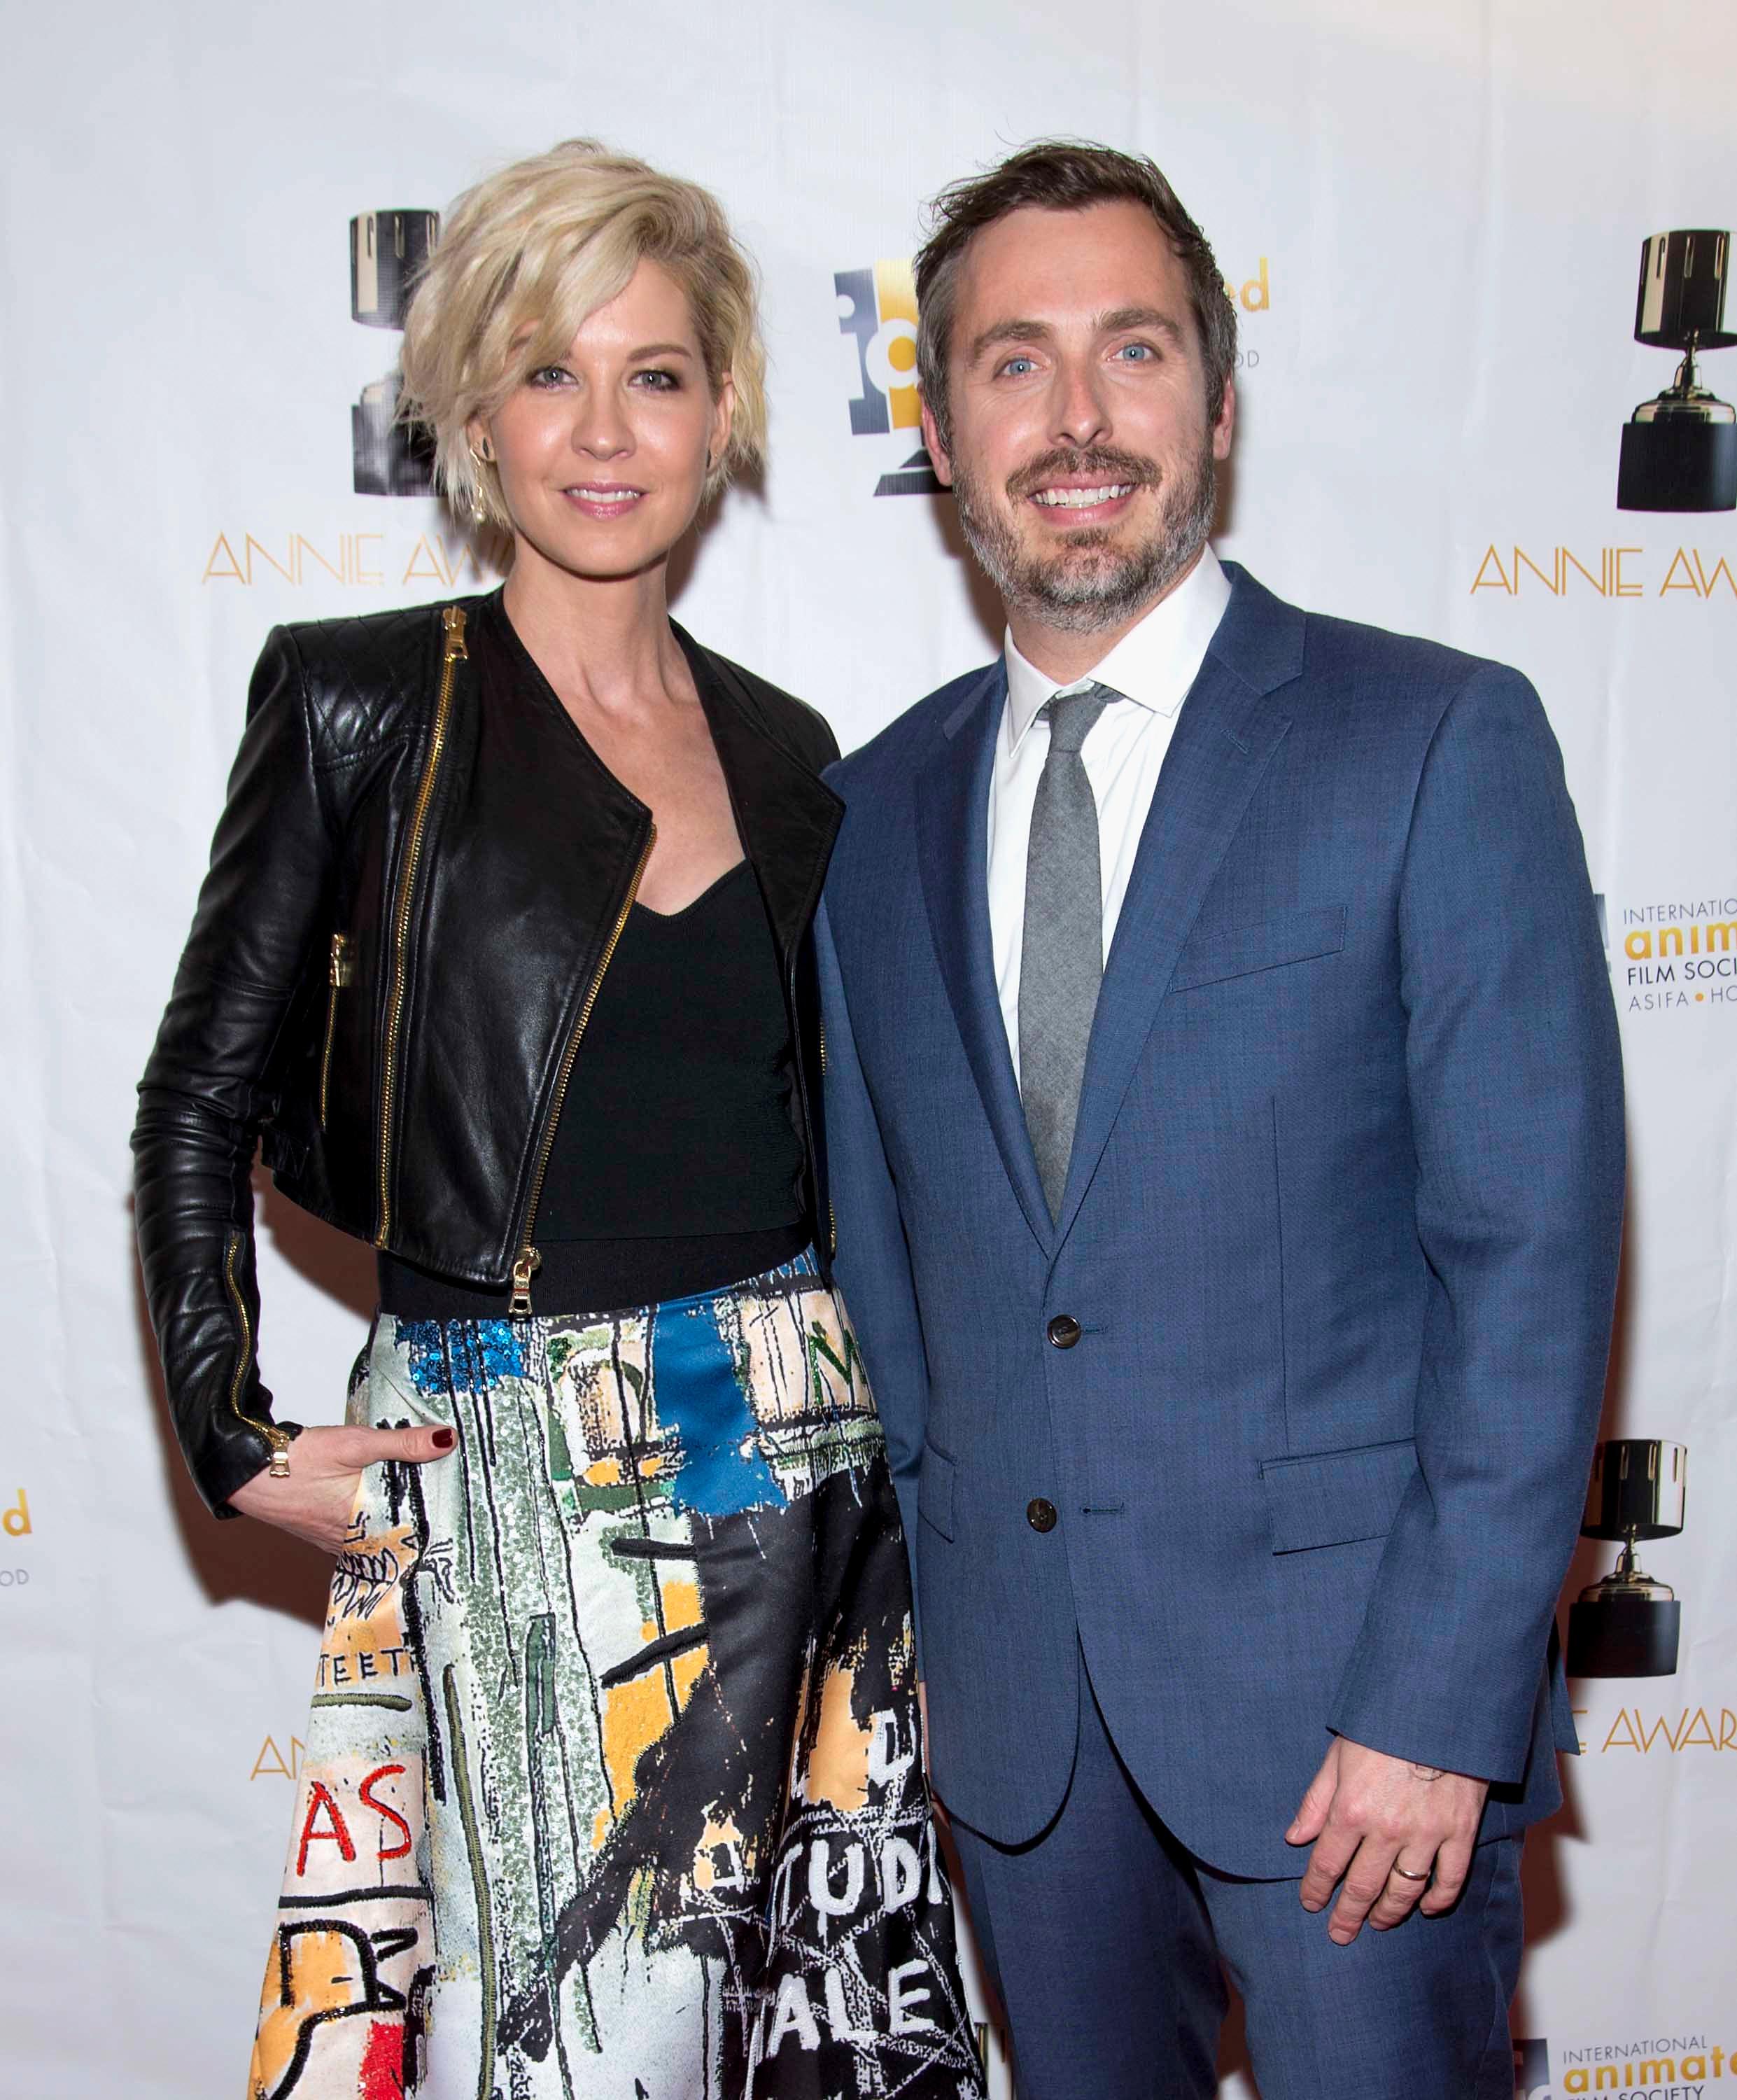 Jenna Elfman arrives to the 44th Annual Annie Awards